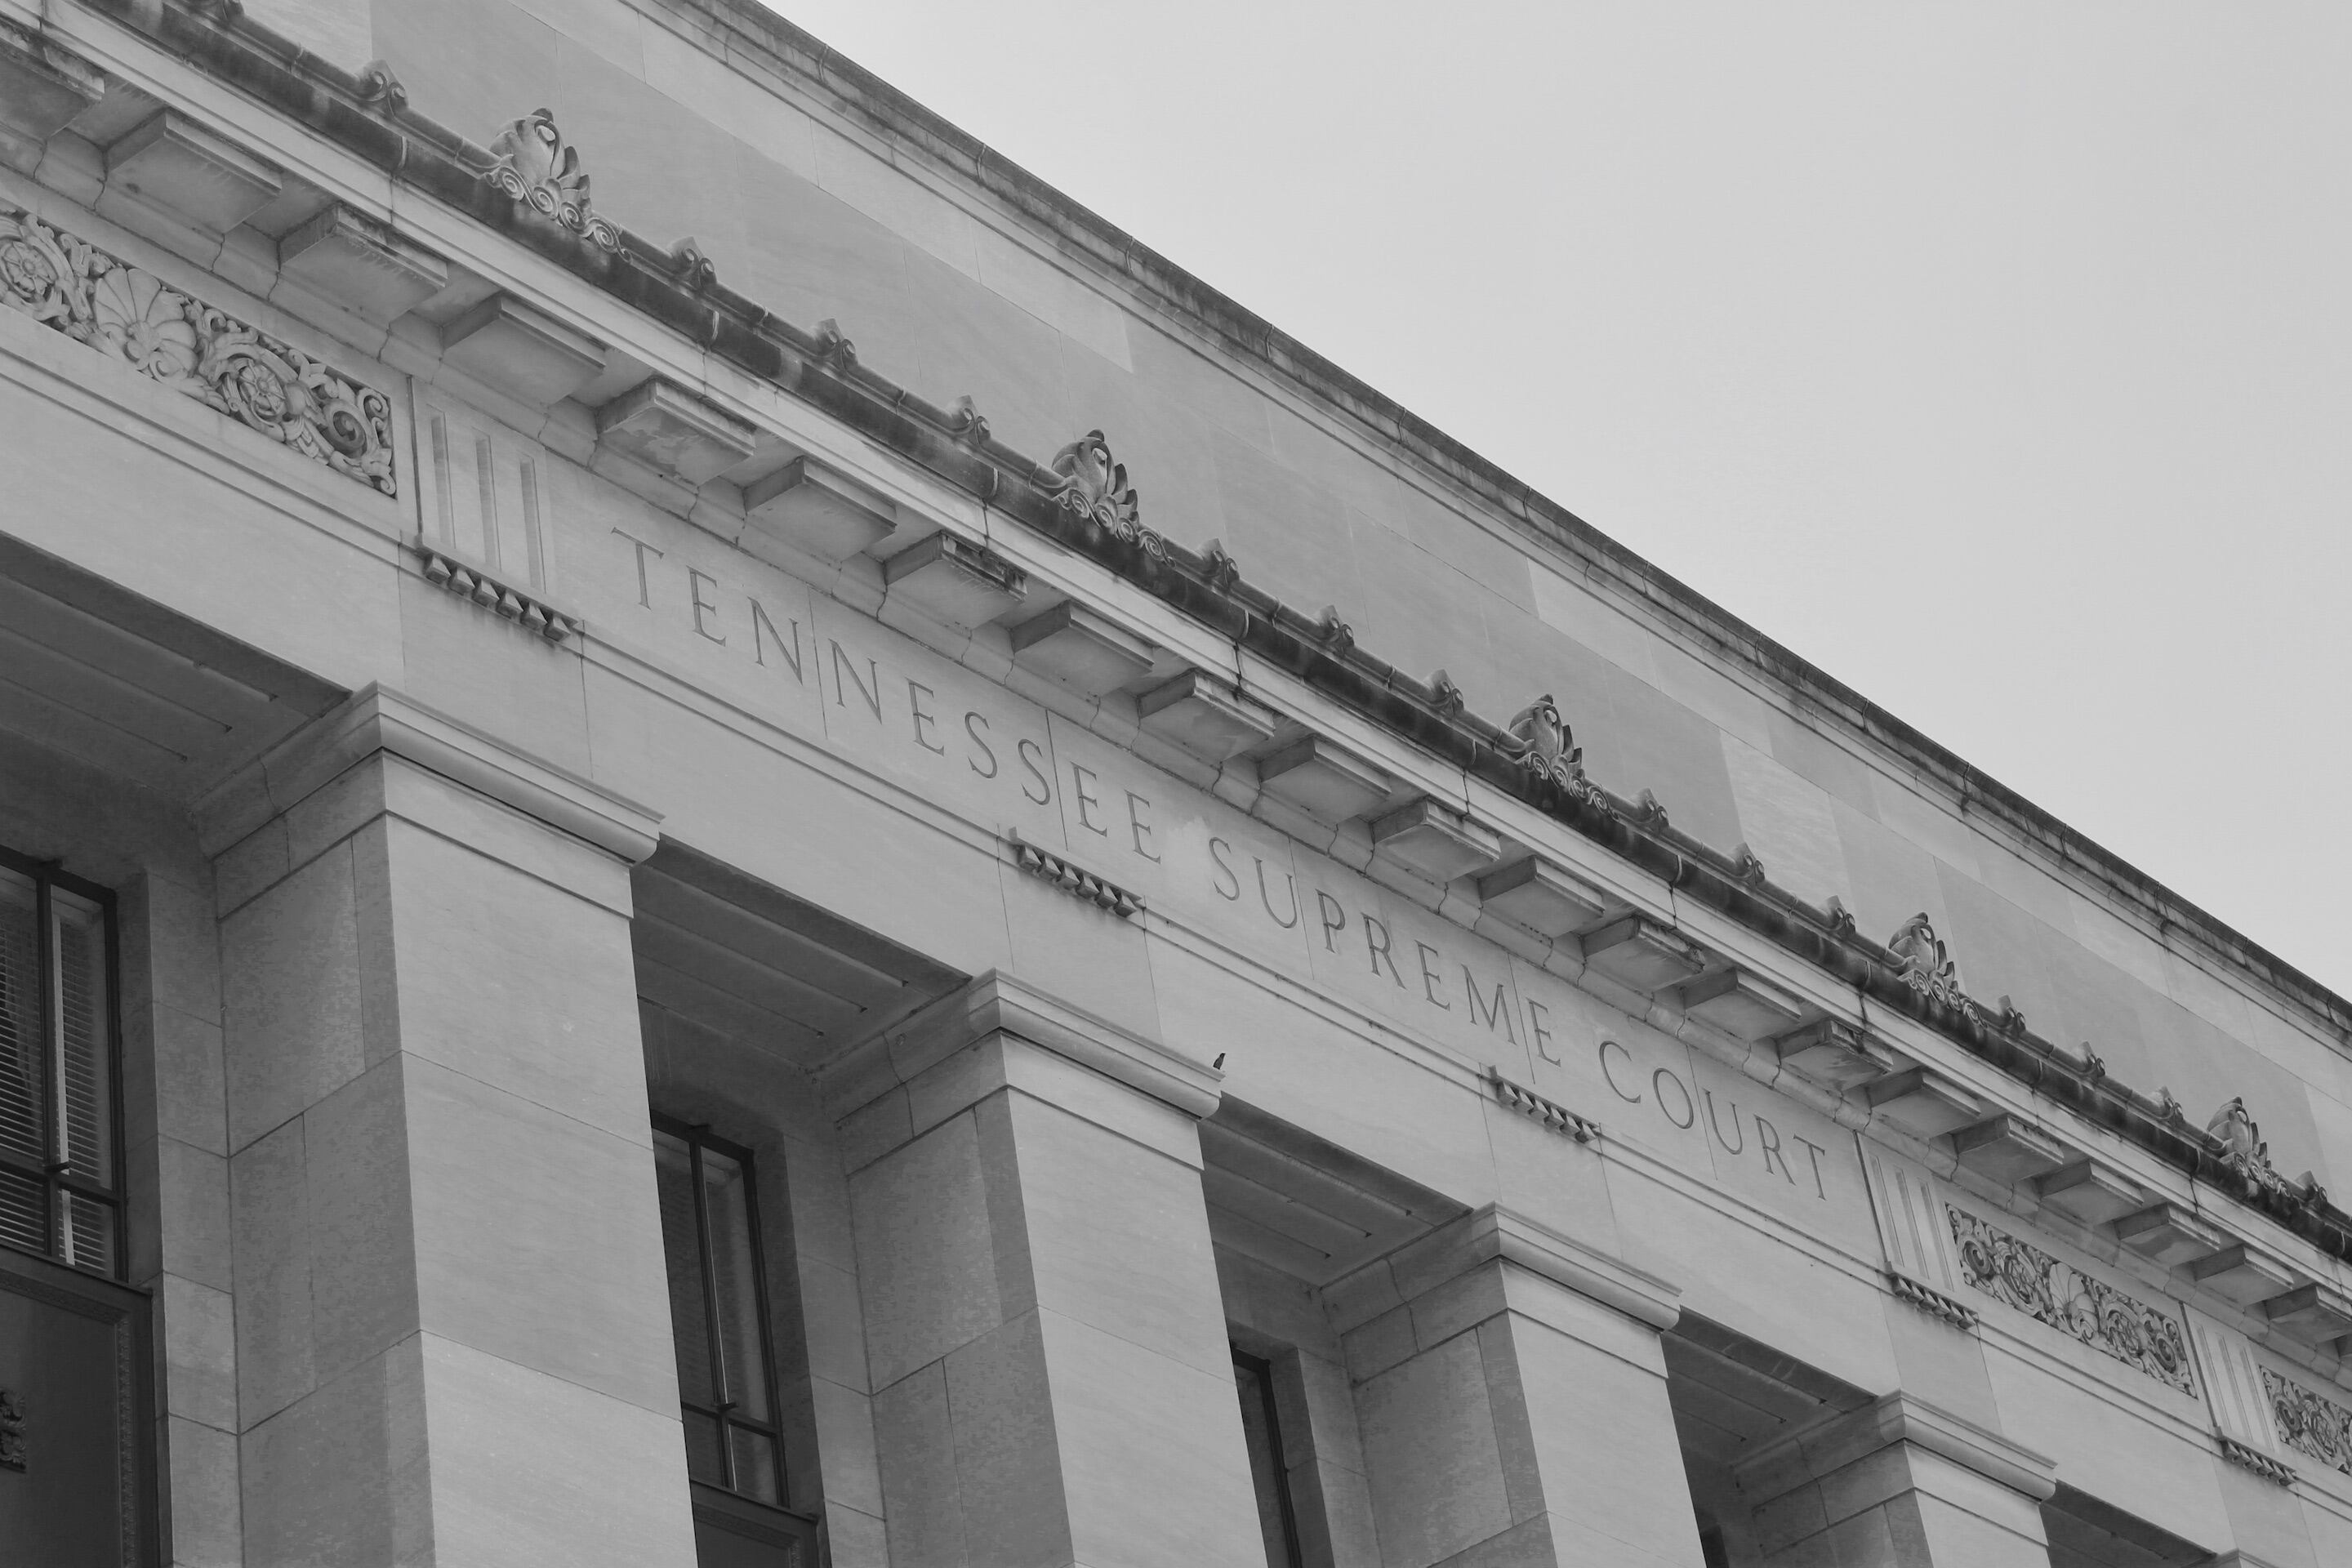 A large, multi-column building with “Tennessee Supreme Court” etched into the facade.